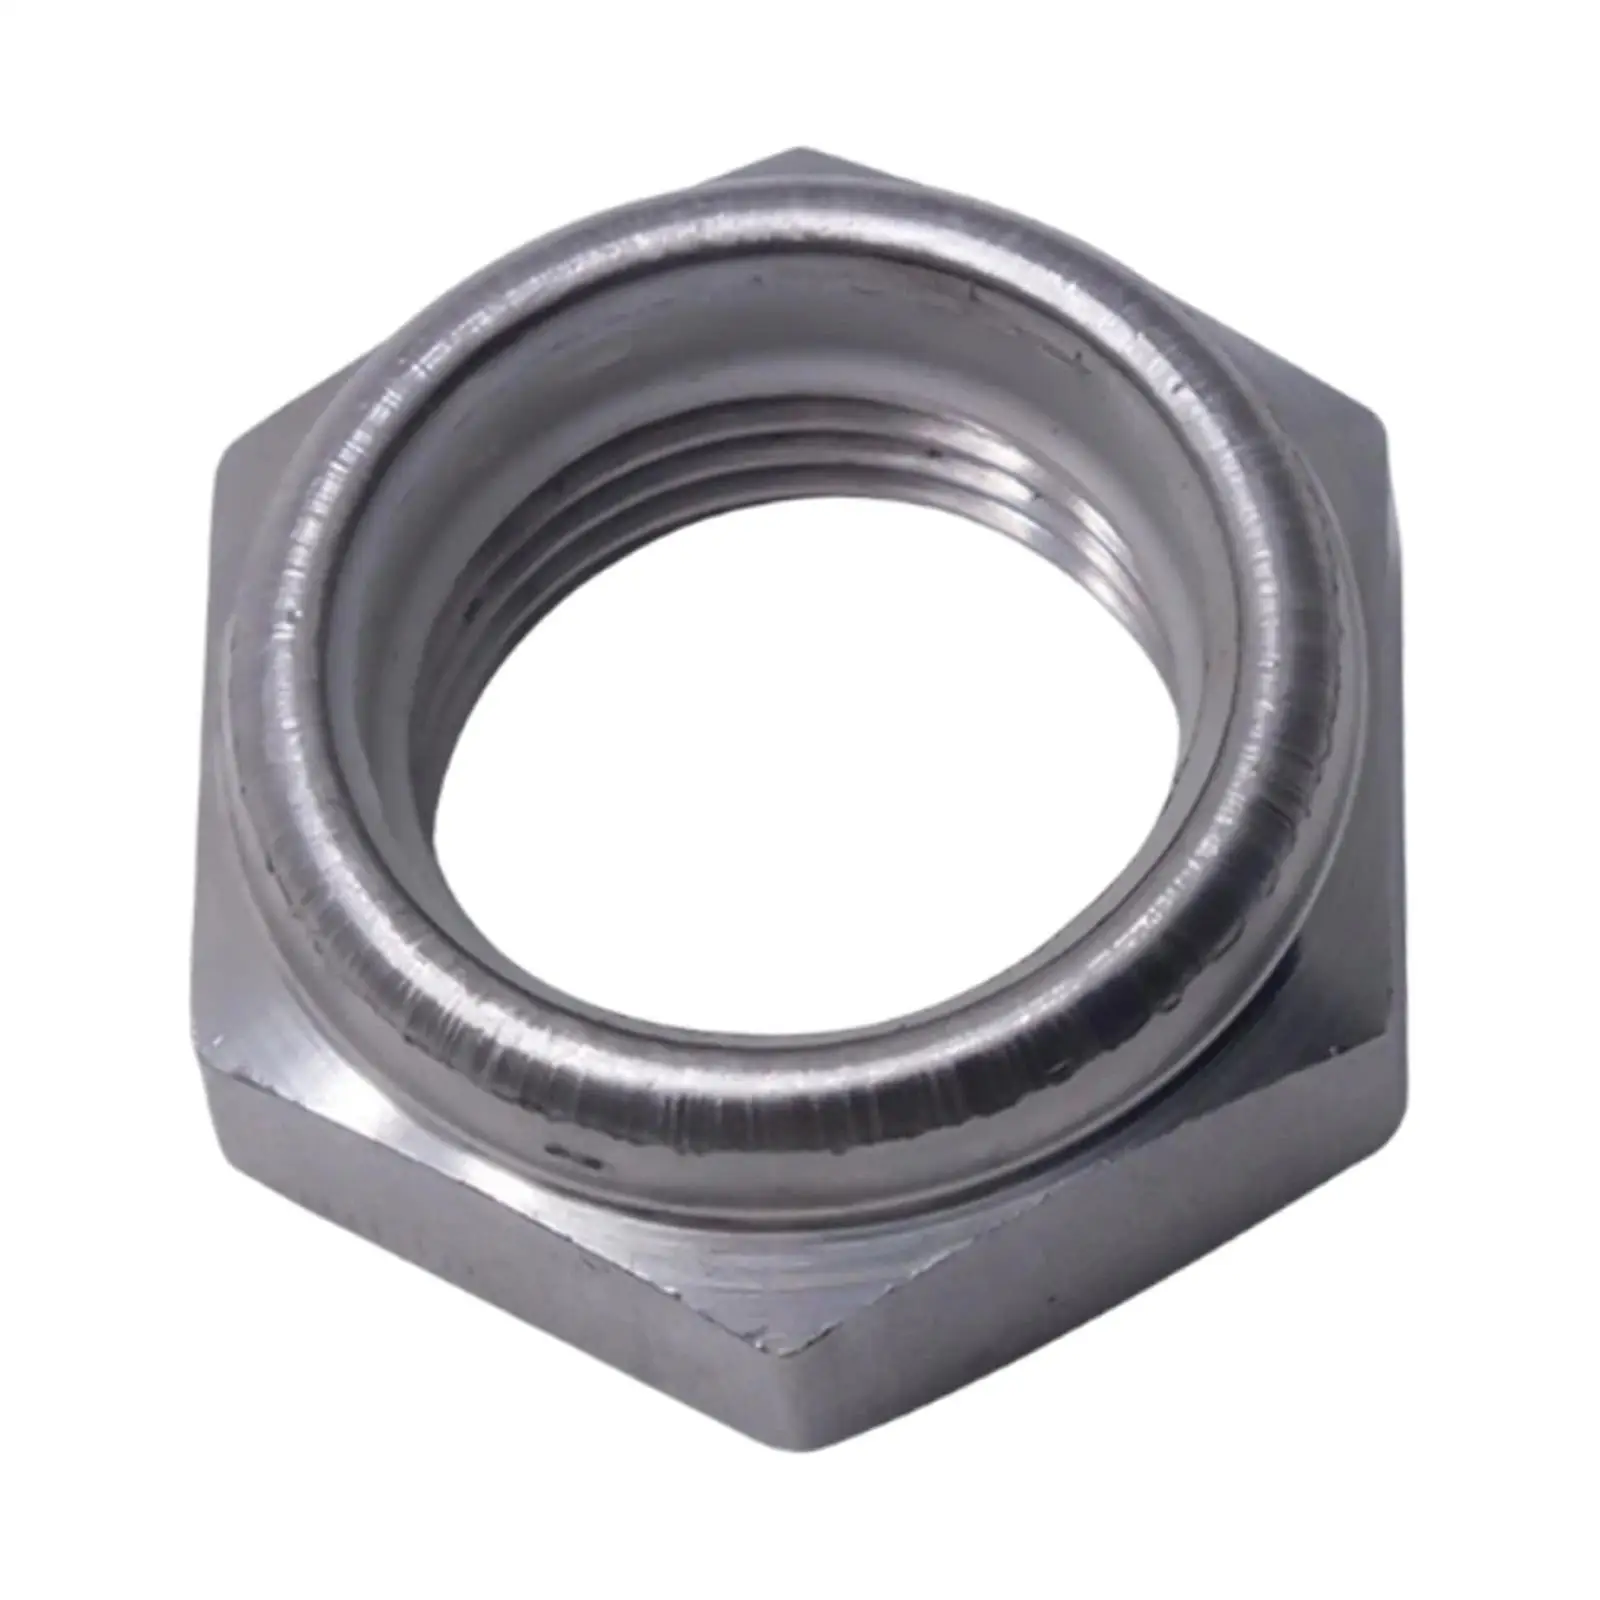 Replacement Self Locking Nut 90185-22043 90185-22043-00 Hex Locknut Replace for Hanghkai Easily Install Vehicle Spare Parts